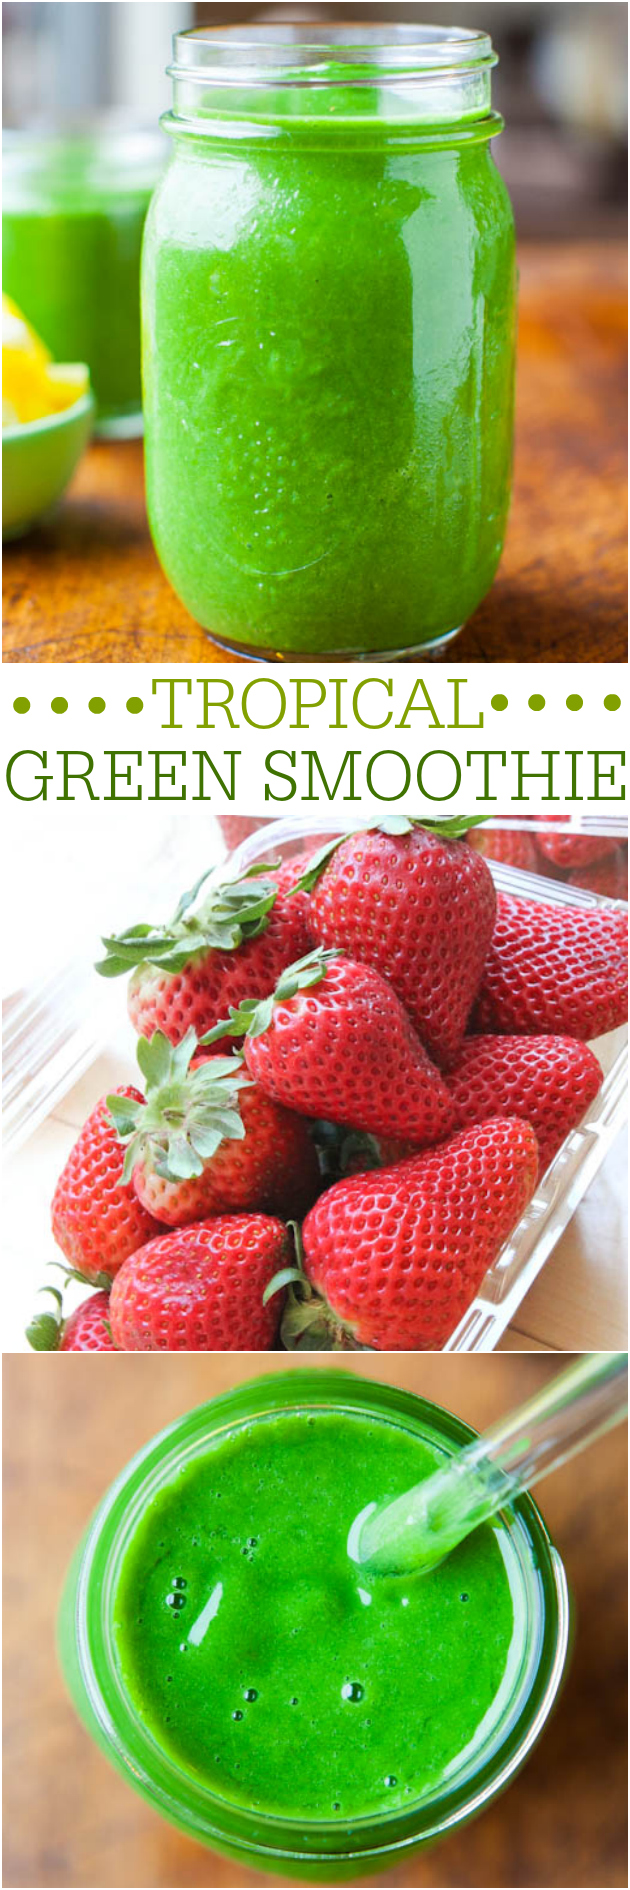 Tropical Green Smoothie — I promise this healthy green smoothie doesn't taste healthy at all! It tastes like a virgin piña colada that just happens to be bright green and good for you. 